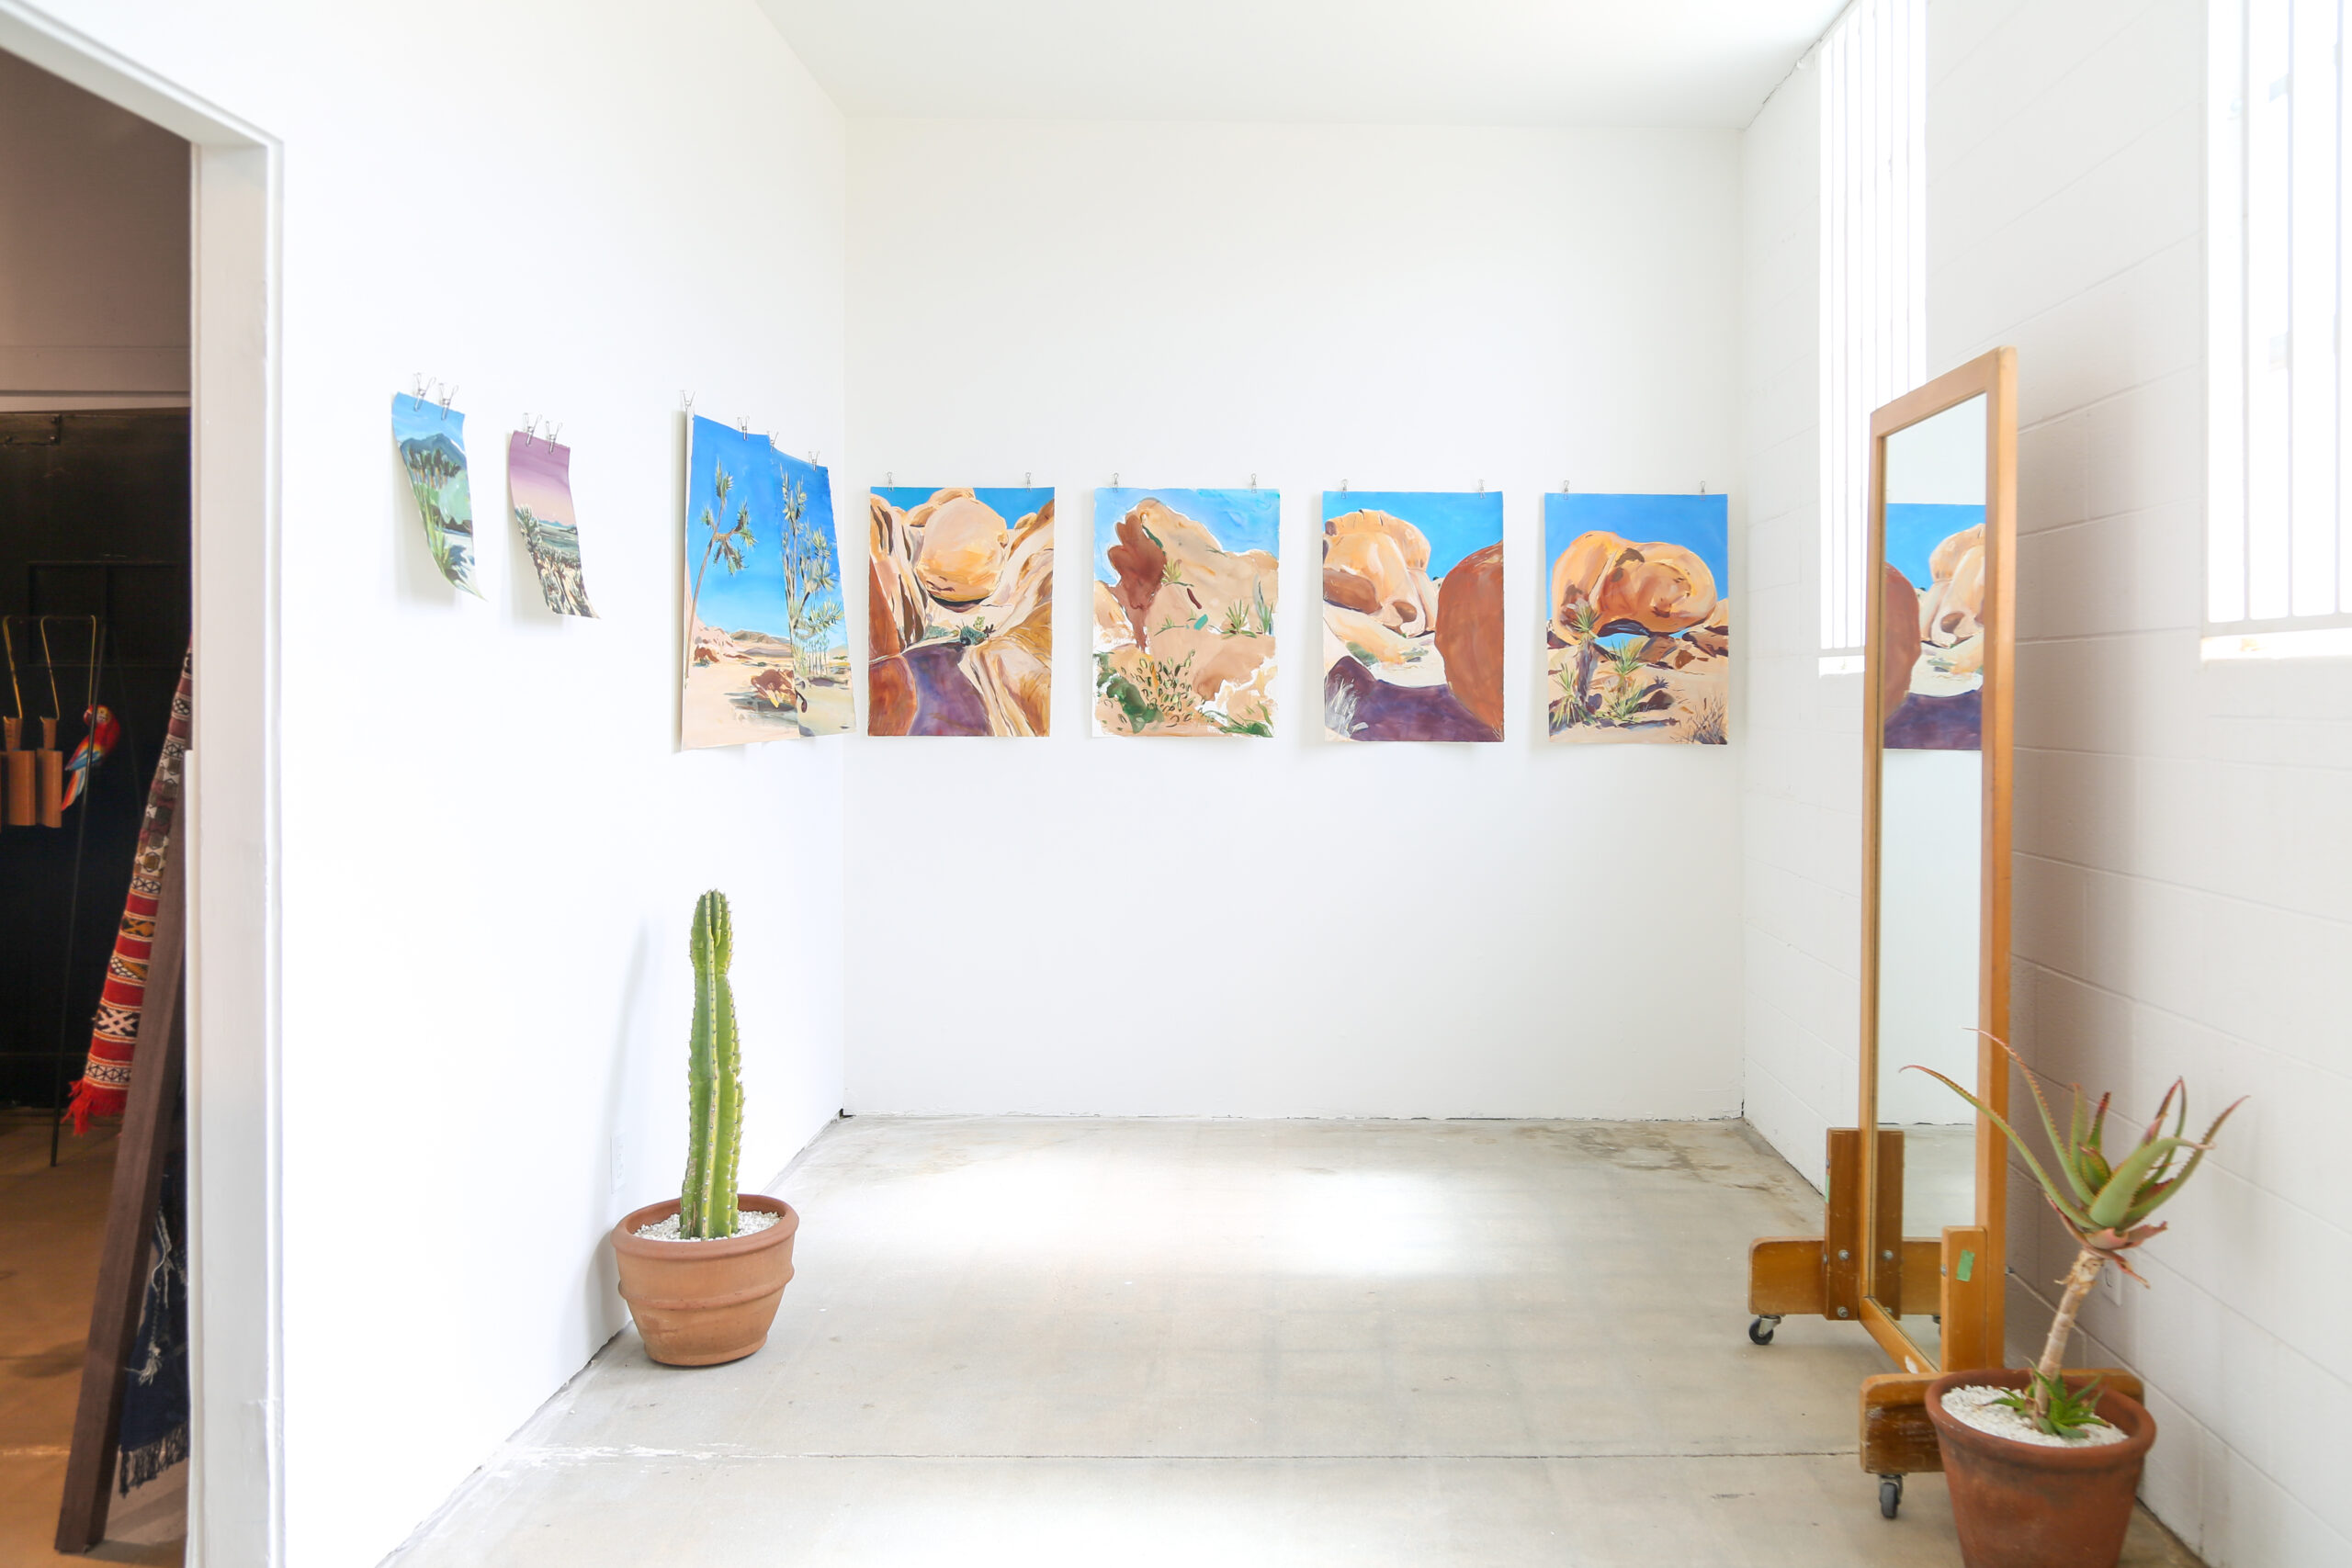 Paintings on display against a white wall gallery by artist Steven Weinberg.